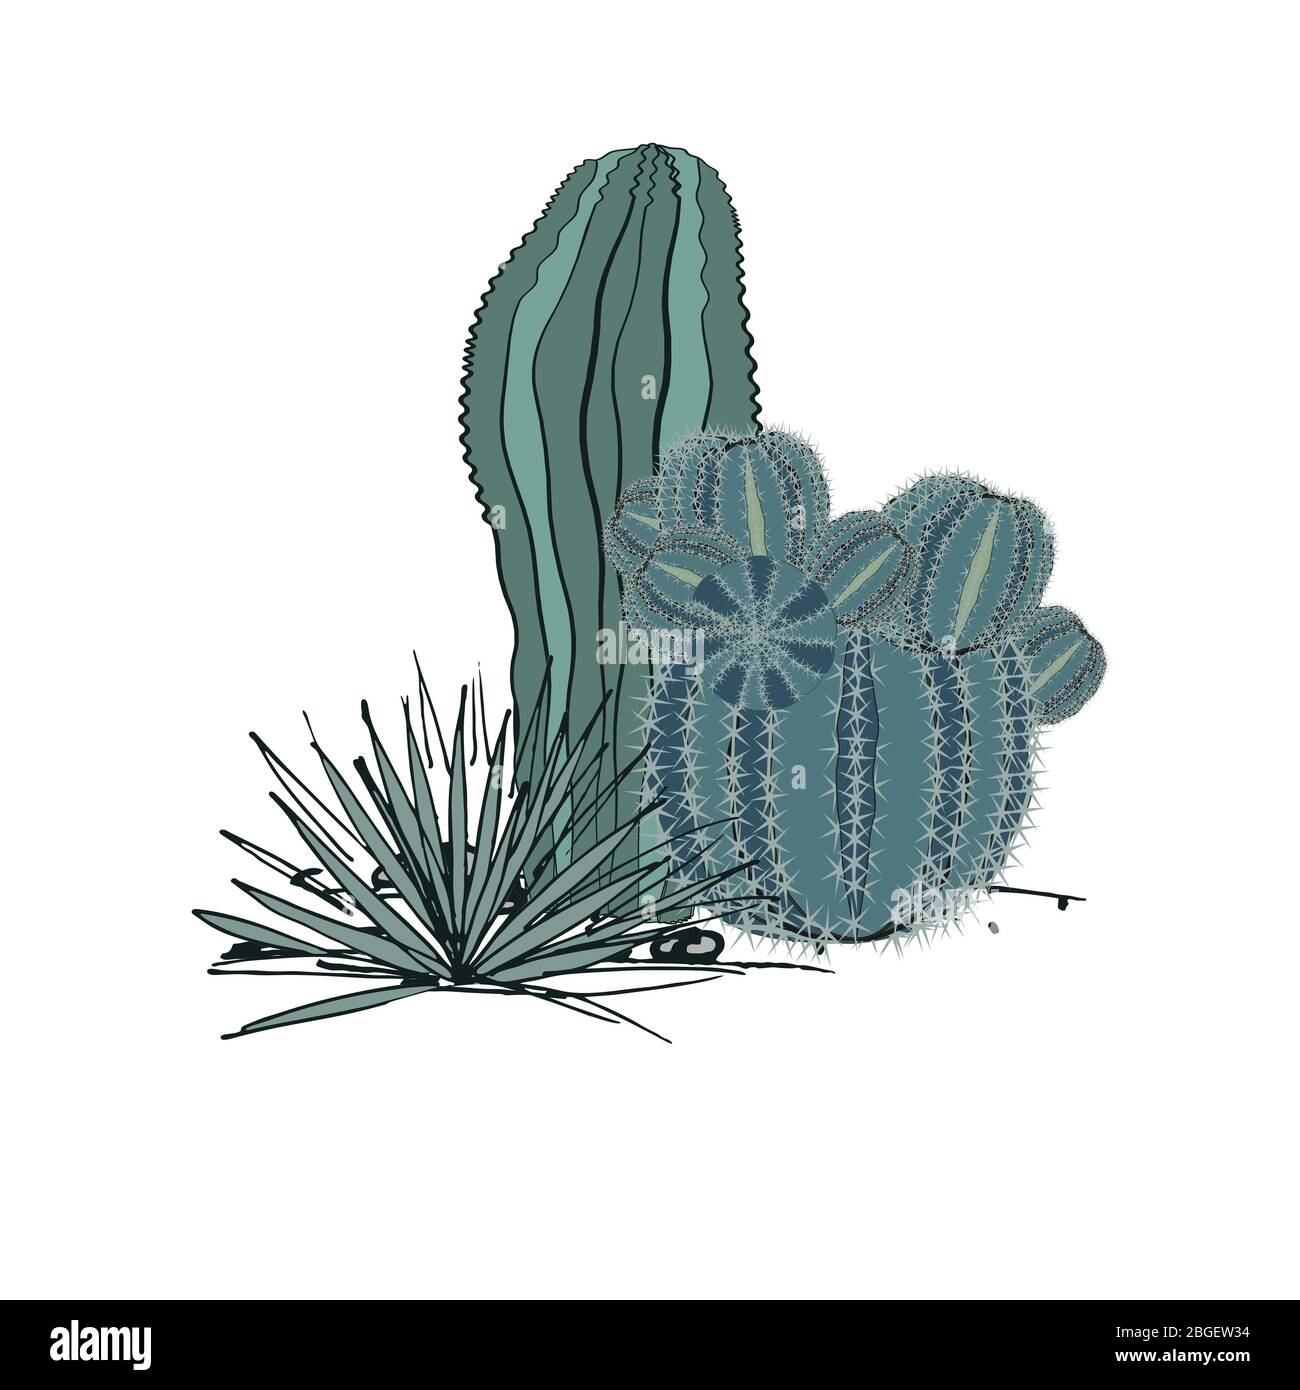 Decorative composition composed of groups of cacti and agave. Vector illustration isolated on white background Stock Vector